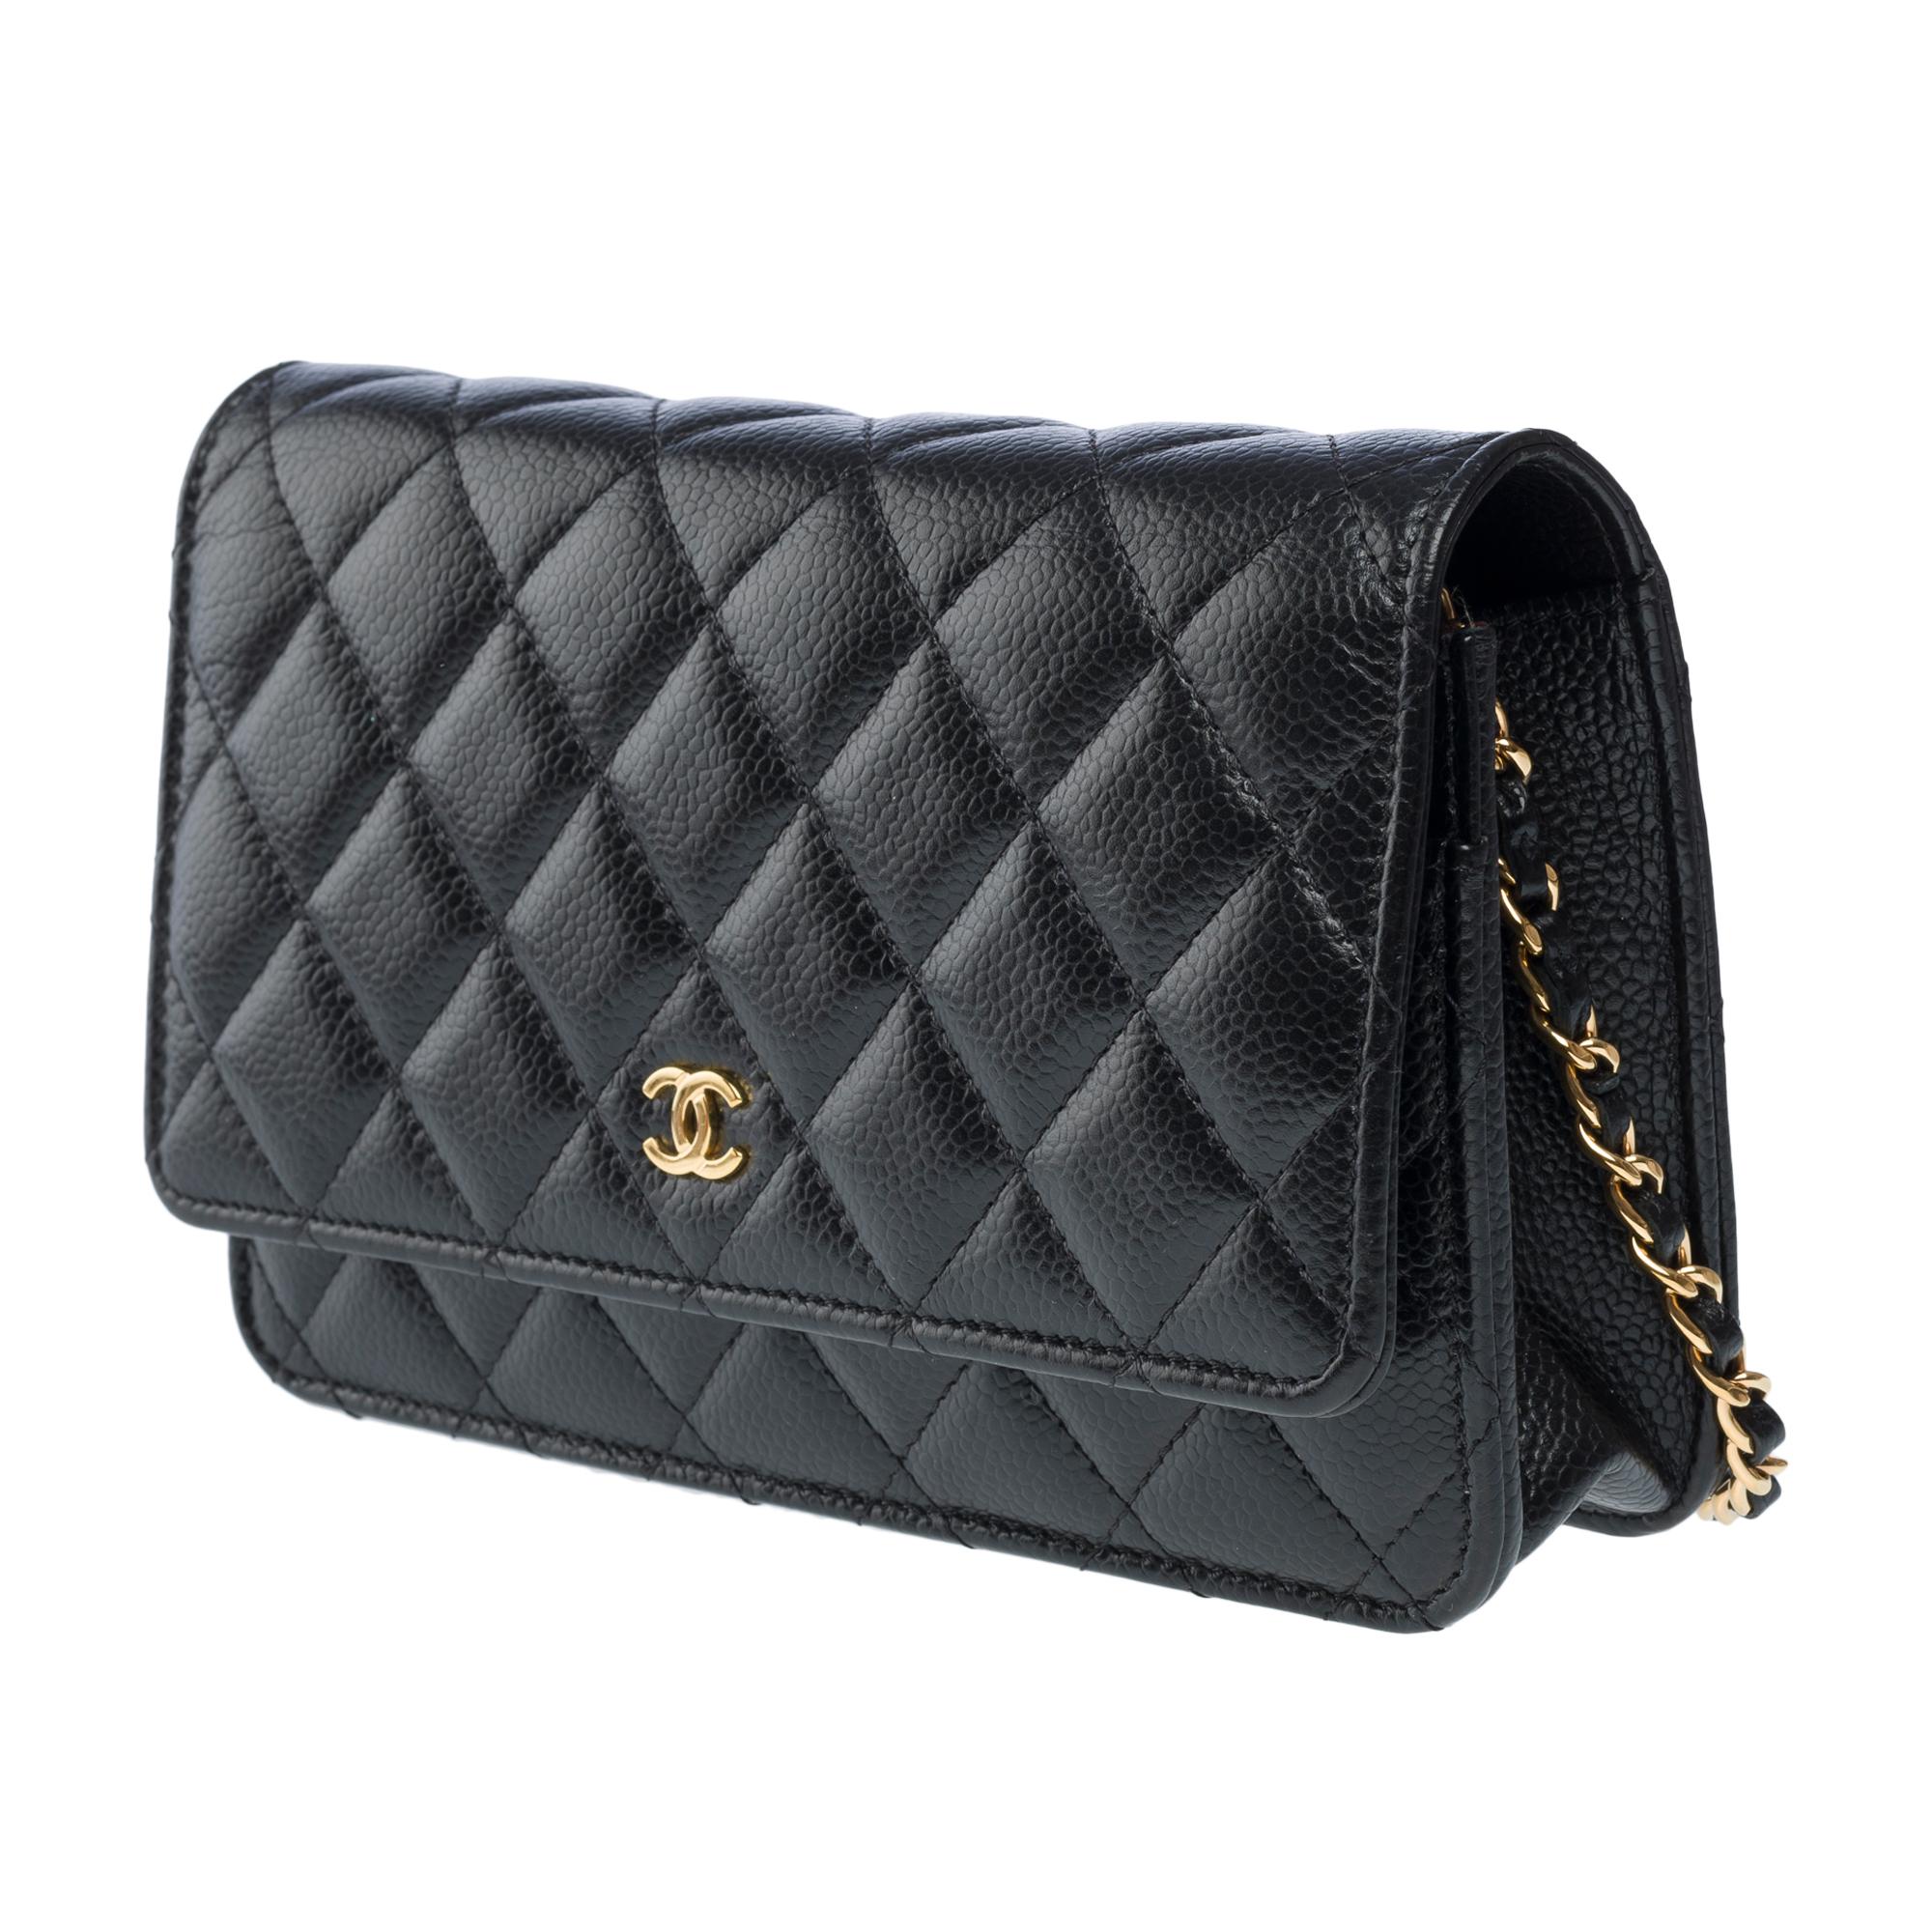 Chanel Wallet on Chain (WOC)  shoulder bag in black Caviar quilted leather, GHW For Sale 1